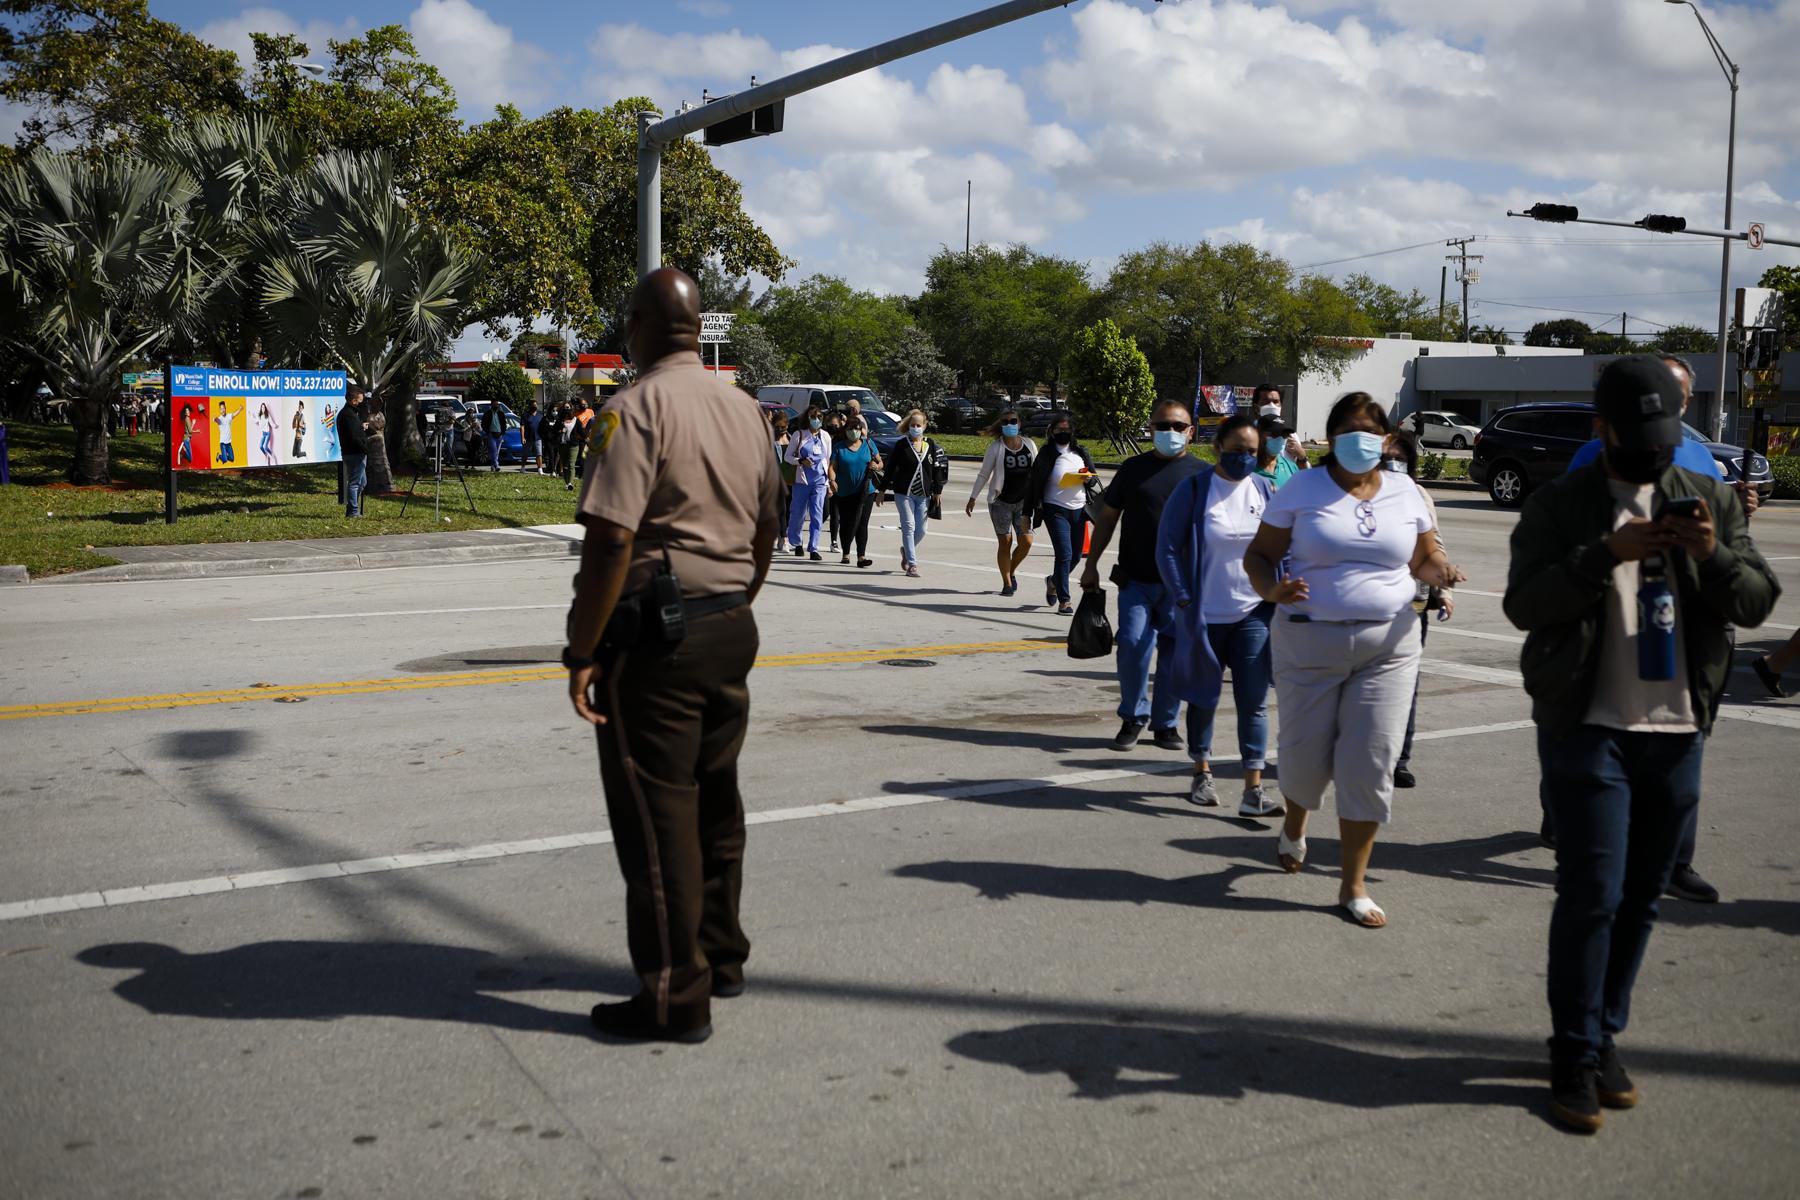 FEMA vaccination facility in North Miami - People wait in line to get the COVID-19 vaccine in a...